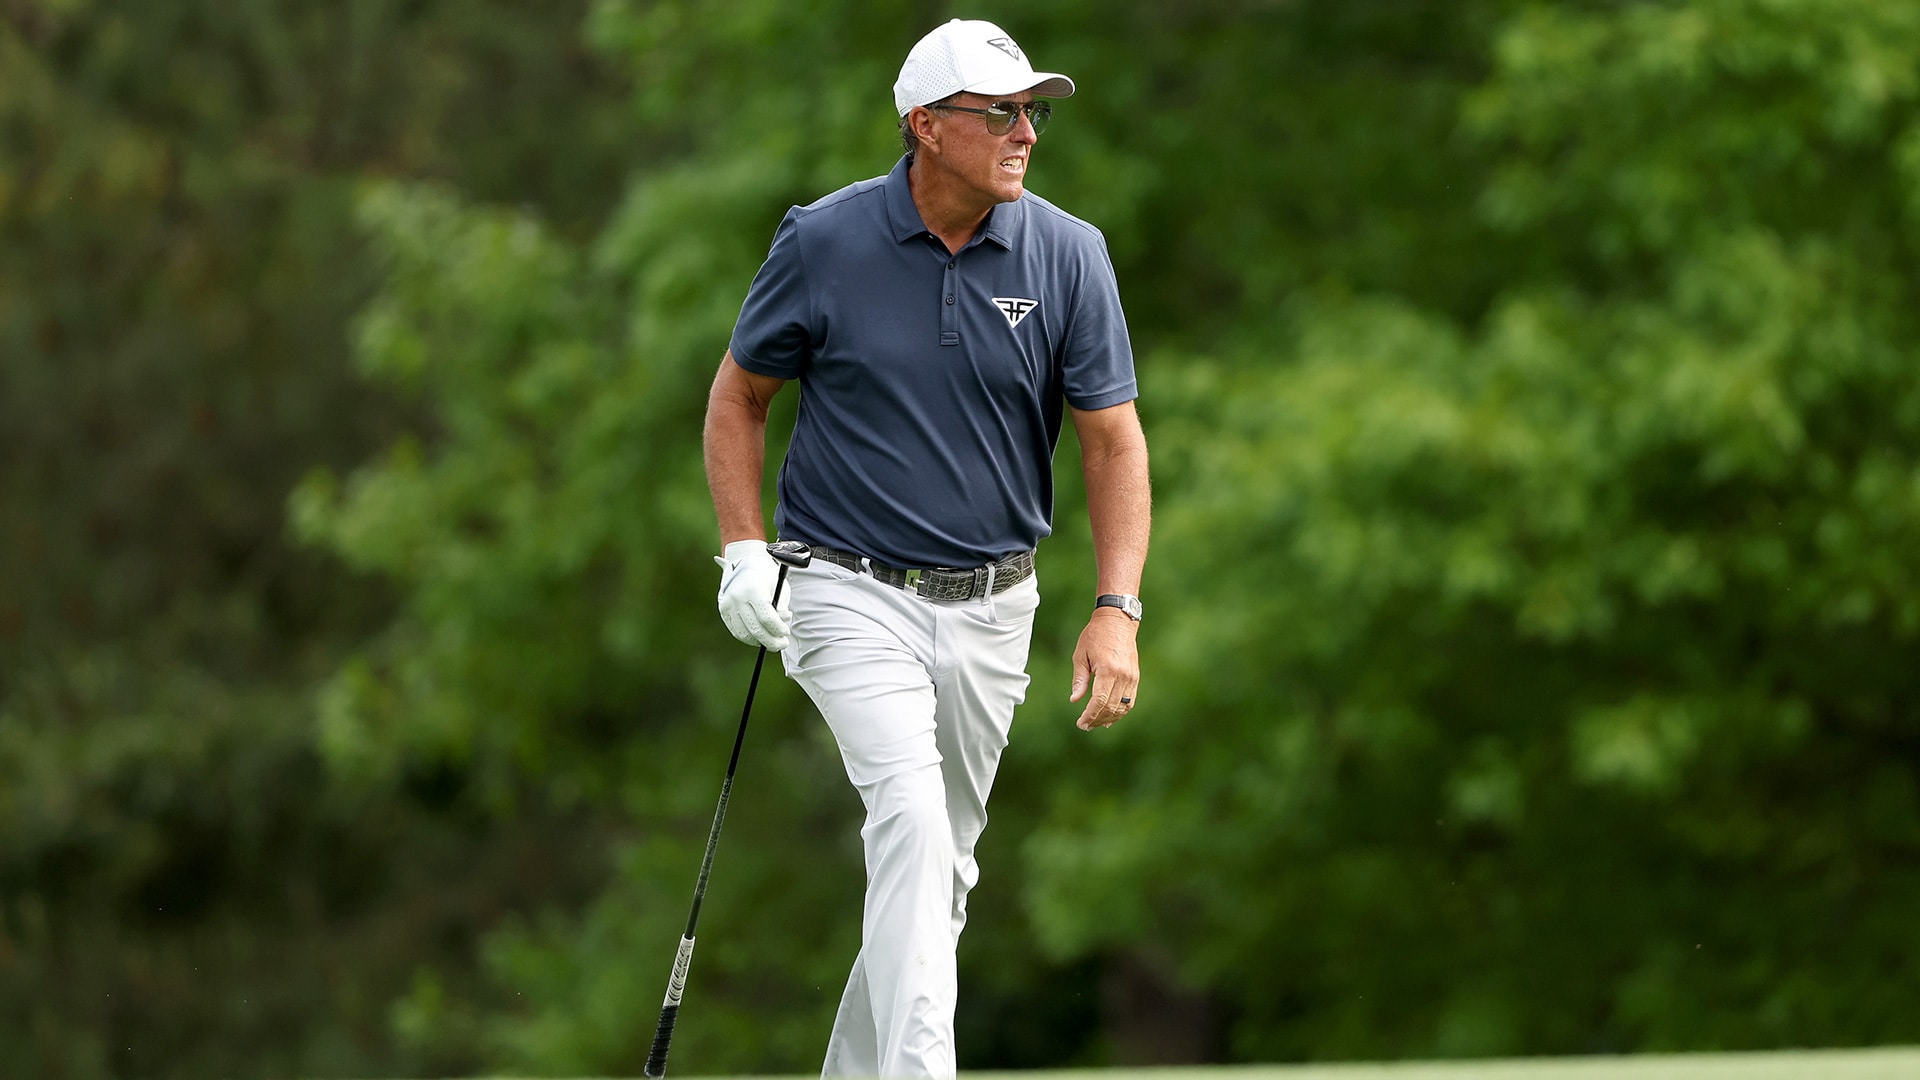 2023 Masters: Phil Mickelson warming up, ready to ‘go on a tear pretty soon’